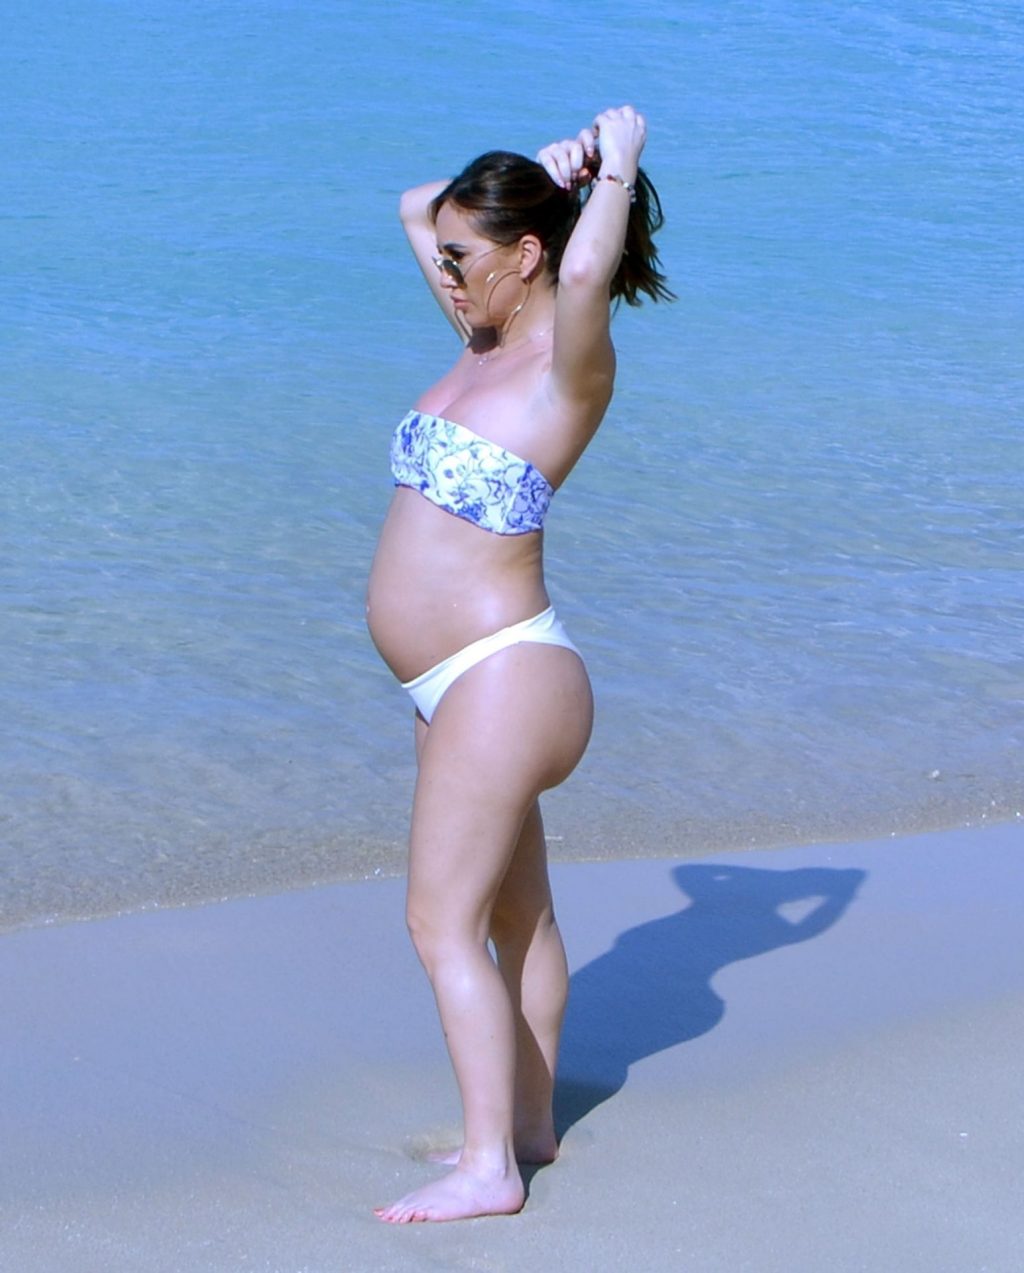 Lauryn Goodman Shows Off Her Ever-Growing Baby Bump Out in the Caribbean Sunshine of Barbados (26 Photos)